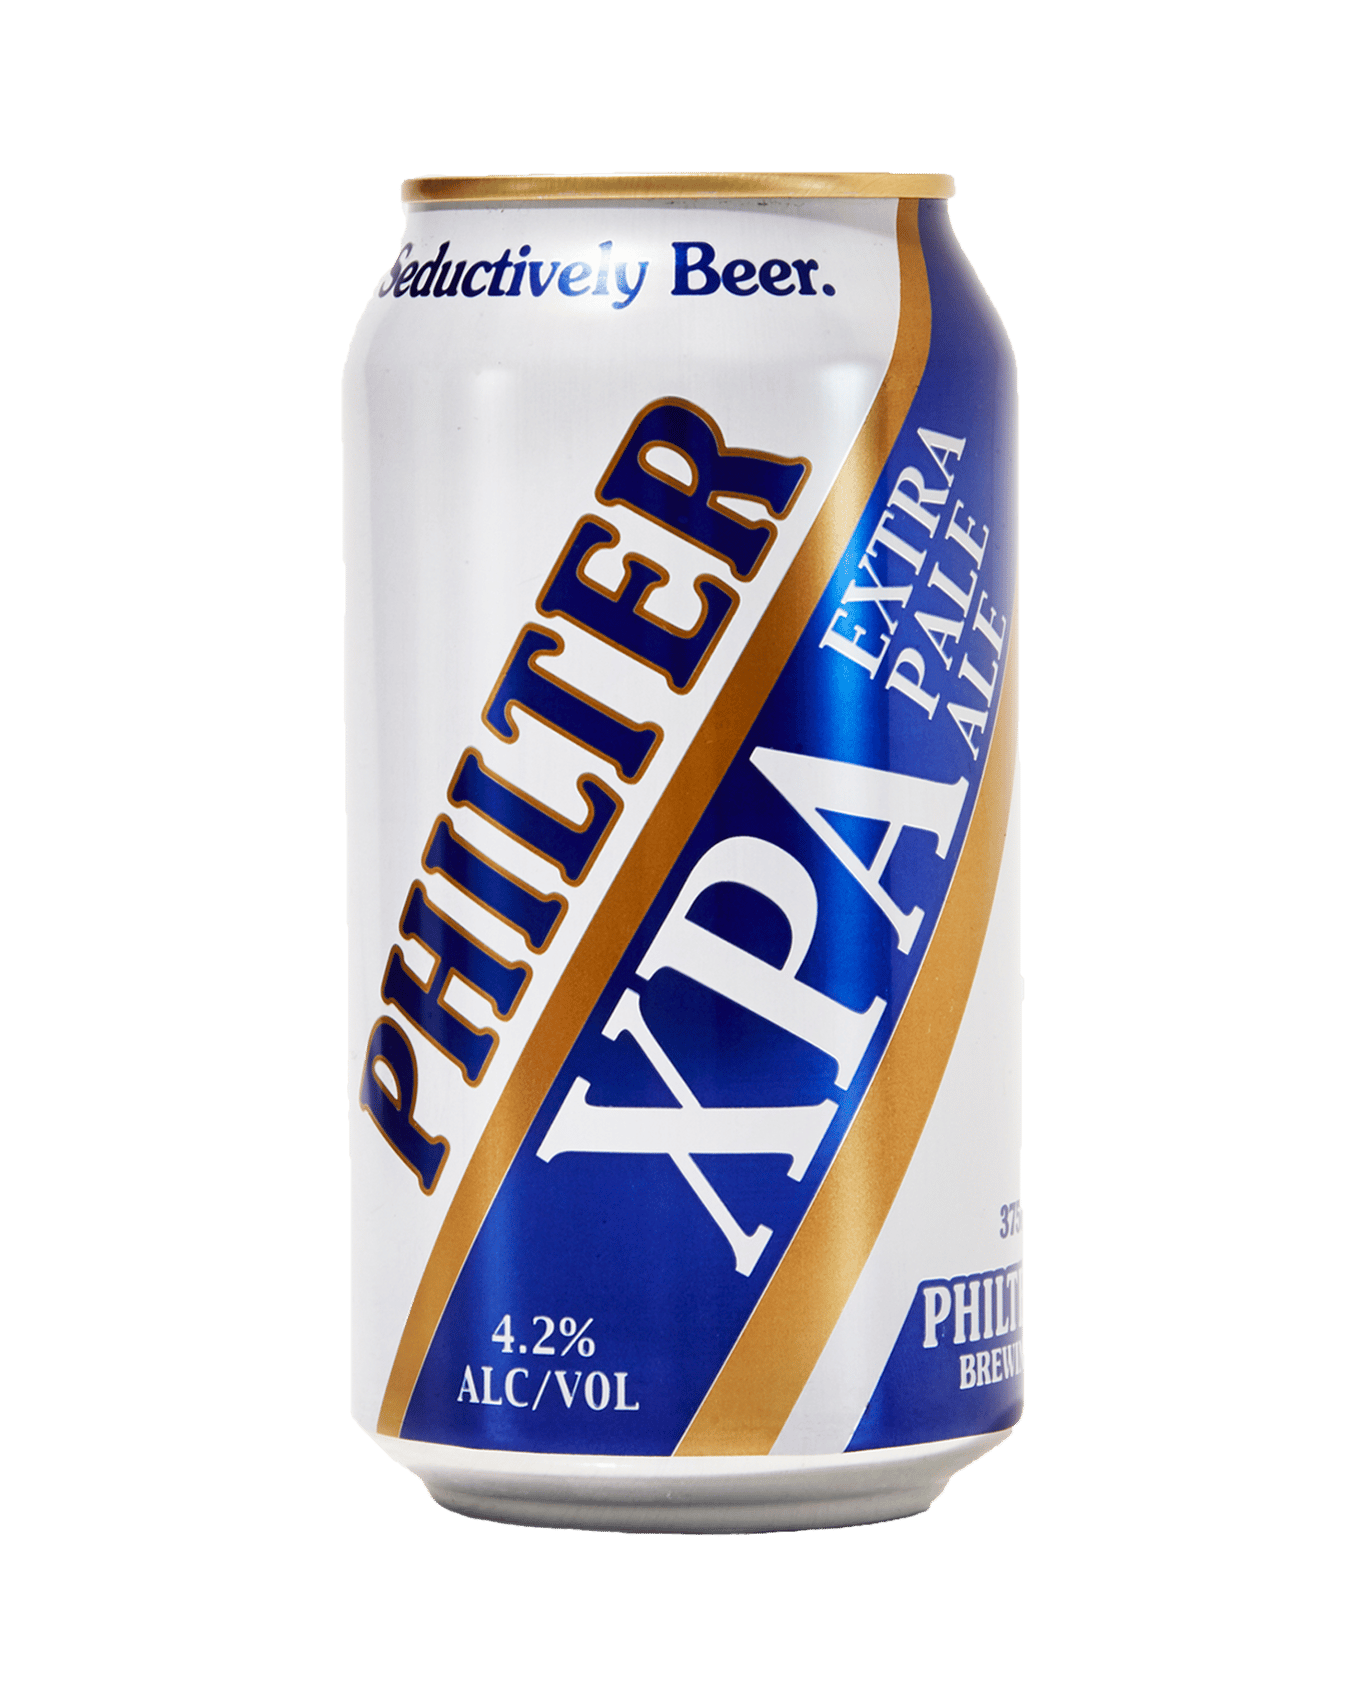 Philter Xpa Cans 375ml (Unbeatable Prices): Buy Online @Best Deals with ...